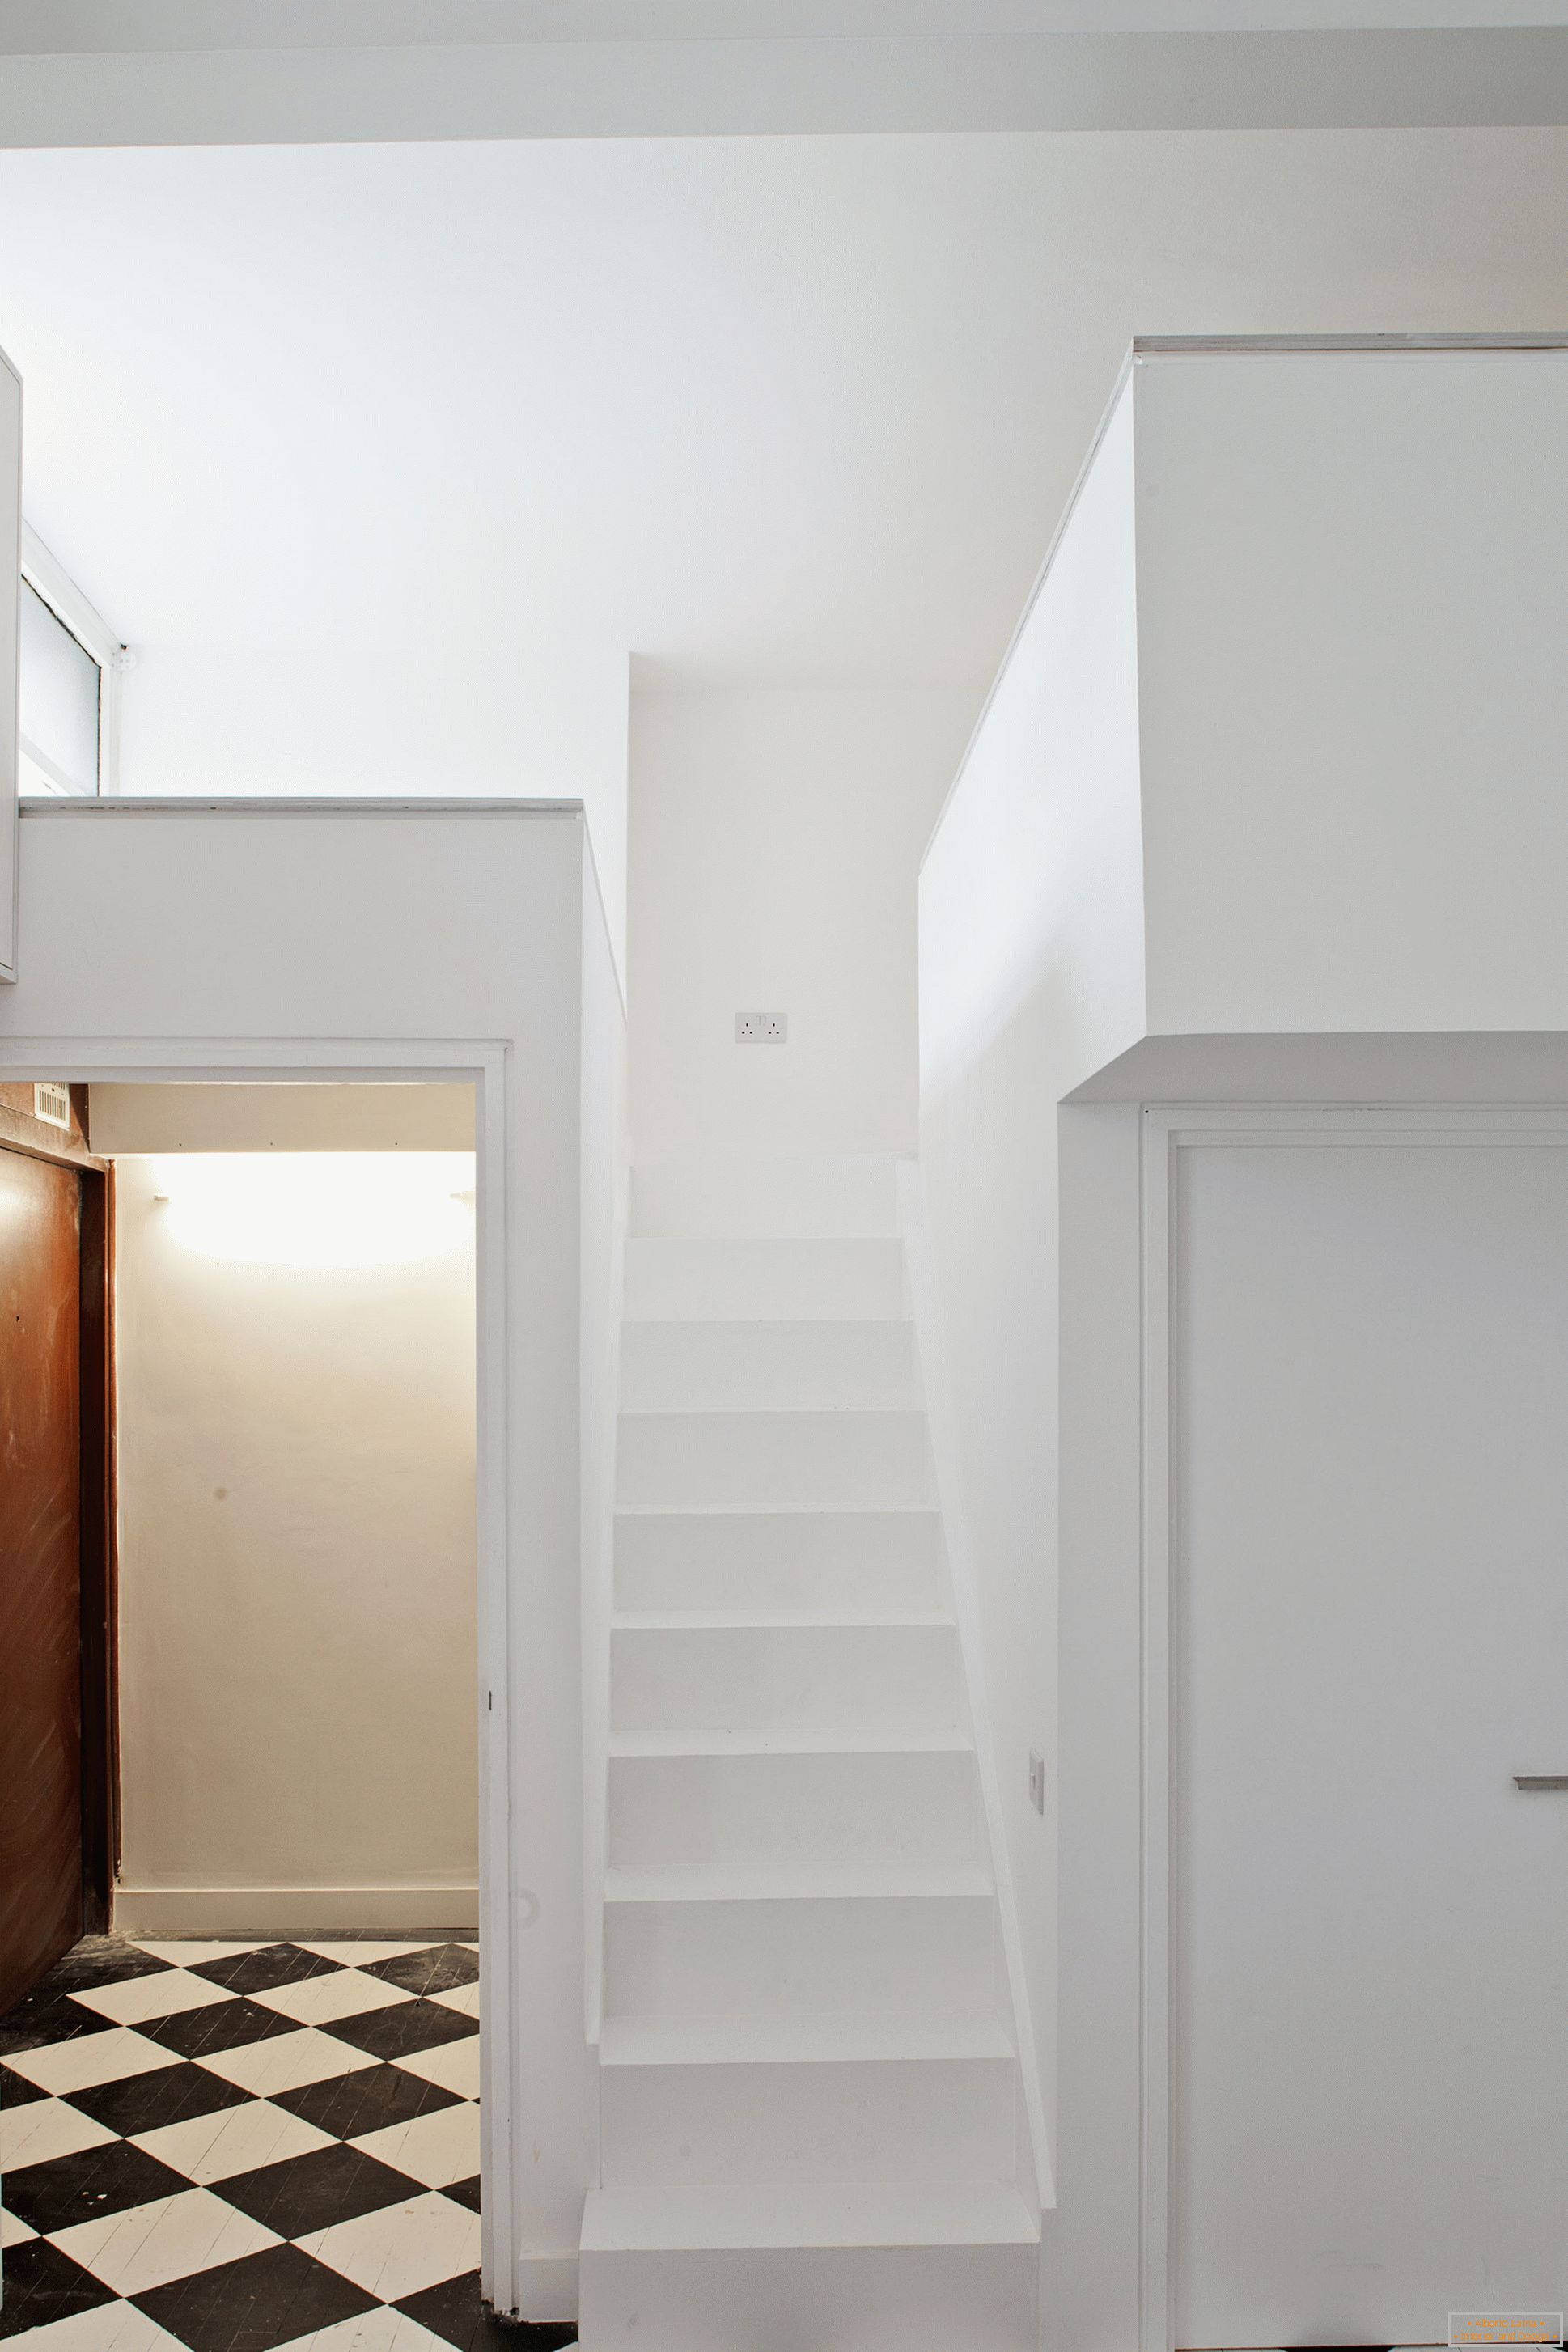 City View House - bakery, converted into a residential studio apartment, London, UK